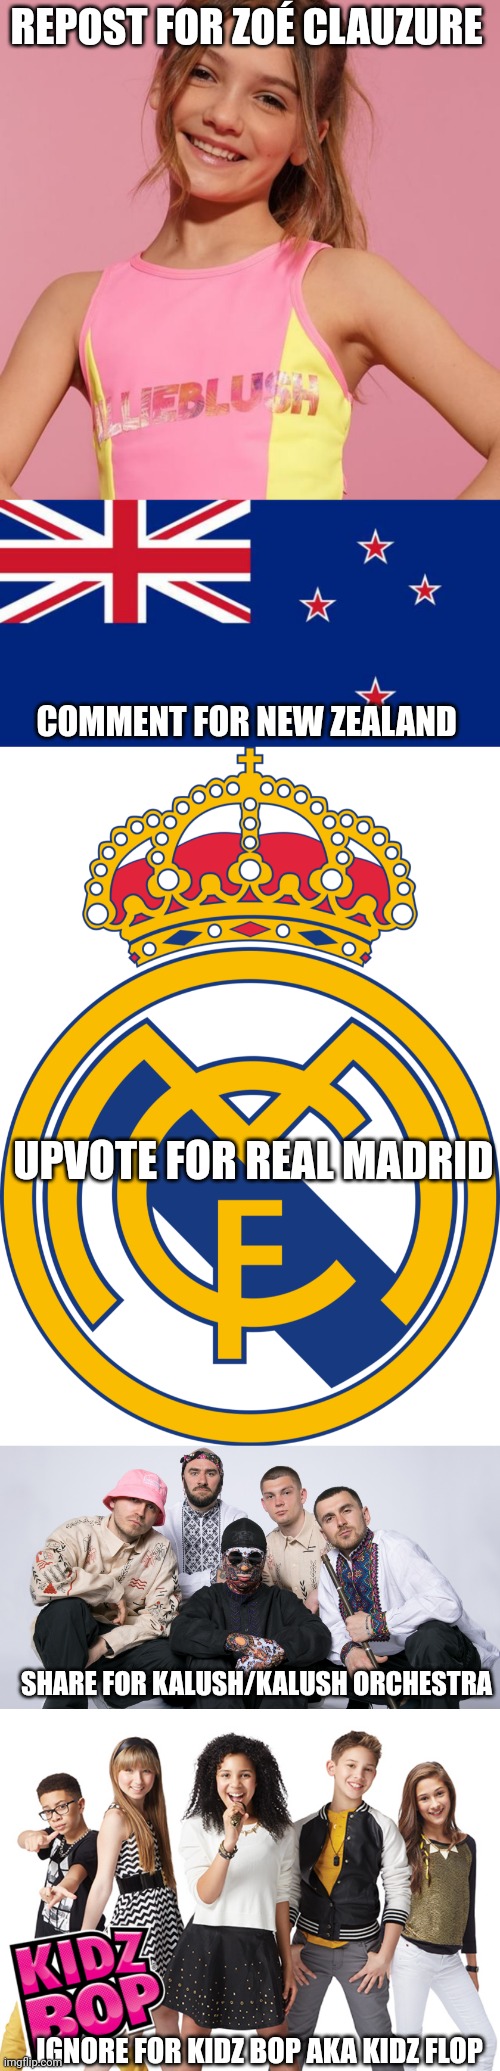 REPOST FOR ZOÉ CLAUZURE; COMMENT FOR NEW ZEALAND; UPVOTE FOR REAL MADRID; SHARE FOR KALUSH/KALUSH ORCHESTRA; IGNORE FOR KIDZ BOP AKA KIDZ FLOP | image tagged in real madrid,kidz bop,new zealand,memes,repost,not upvote begging | made w/ Imgflip meme maker